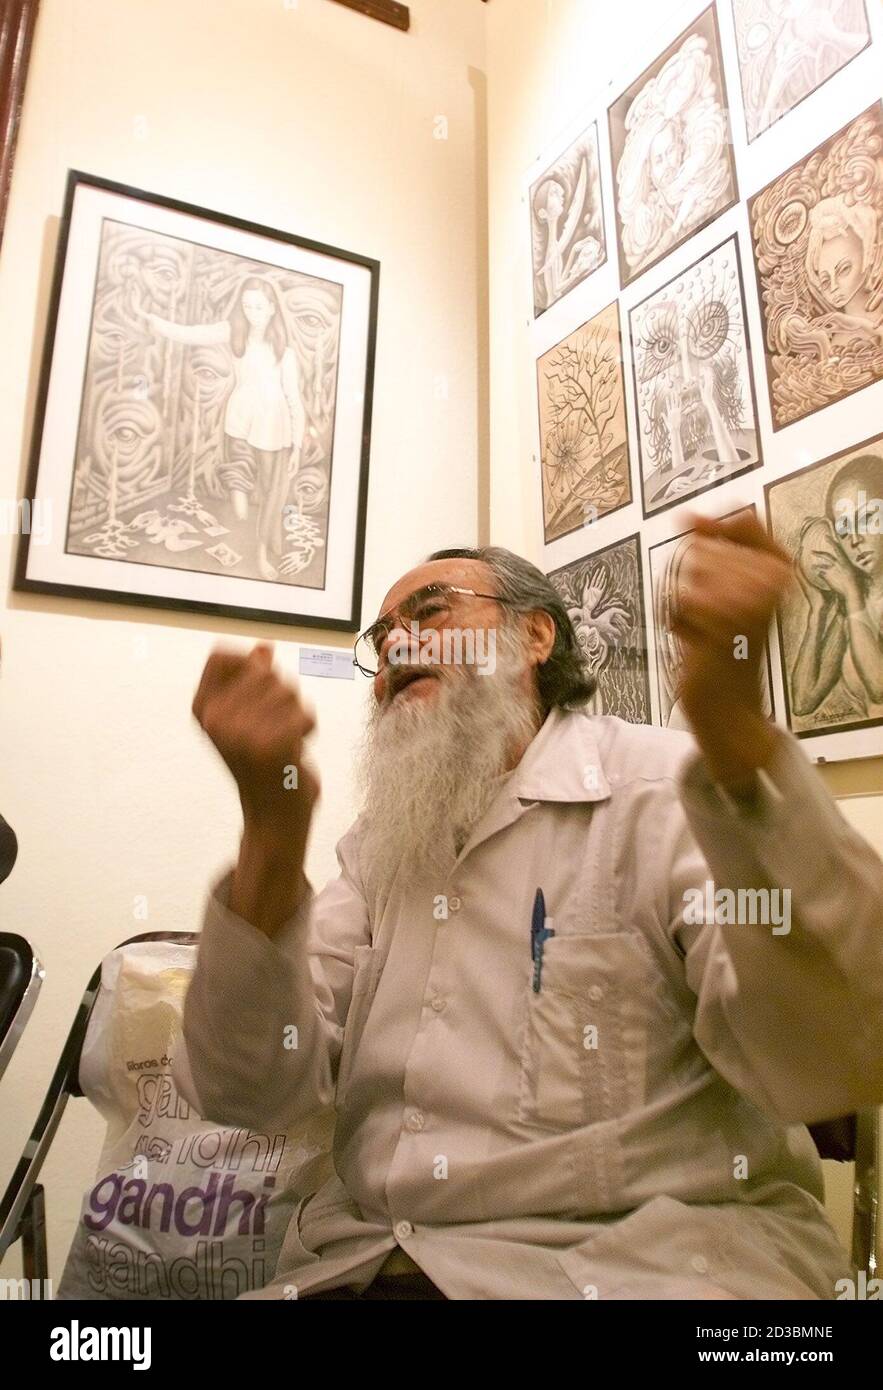 Guillermo Monroy, a student of Mexican cult artist Frida Kahlo, gestures as he chats in front of his paintings at a joint exhibition of work by former students of Kahlo in Mexico City, November 12, 2002. A small group of painters known as the 'Fridos' studied under Mexican painter Frida Kahlo and still pay homage to her in their art. Interest in the life and art of Frida Kahlo has been rekindled by the Hollywood film 'Frida' based on her life staring Mexican actress Salma Hayek. REUTERS/Daniel Aguilar/FOR FEATURE ARTS-KAHLO  AW/ME Stock Photo